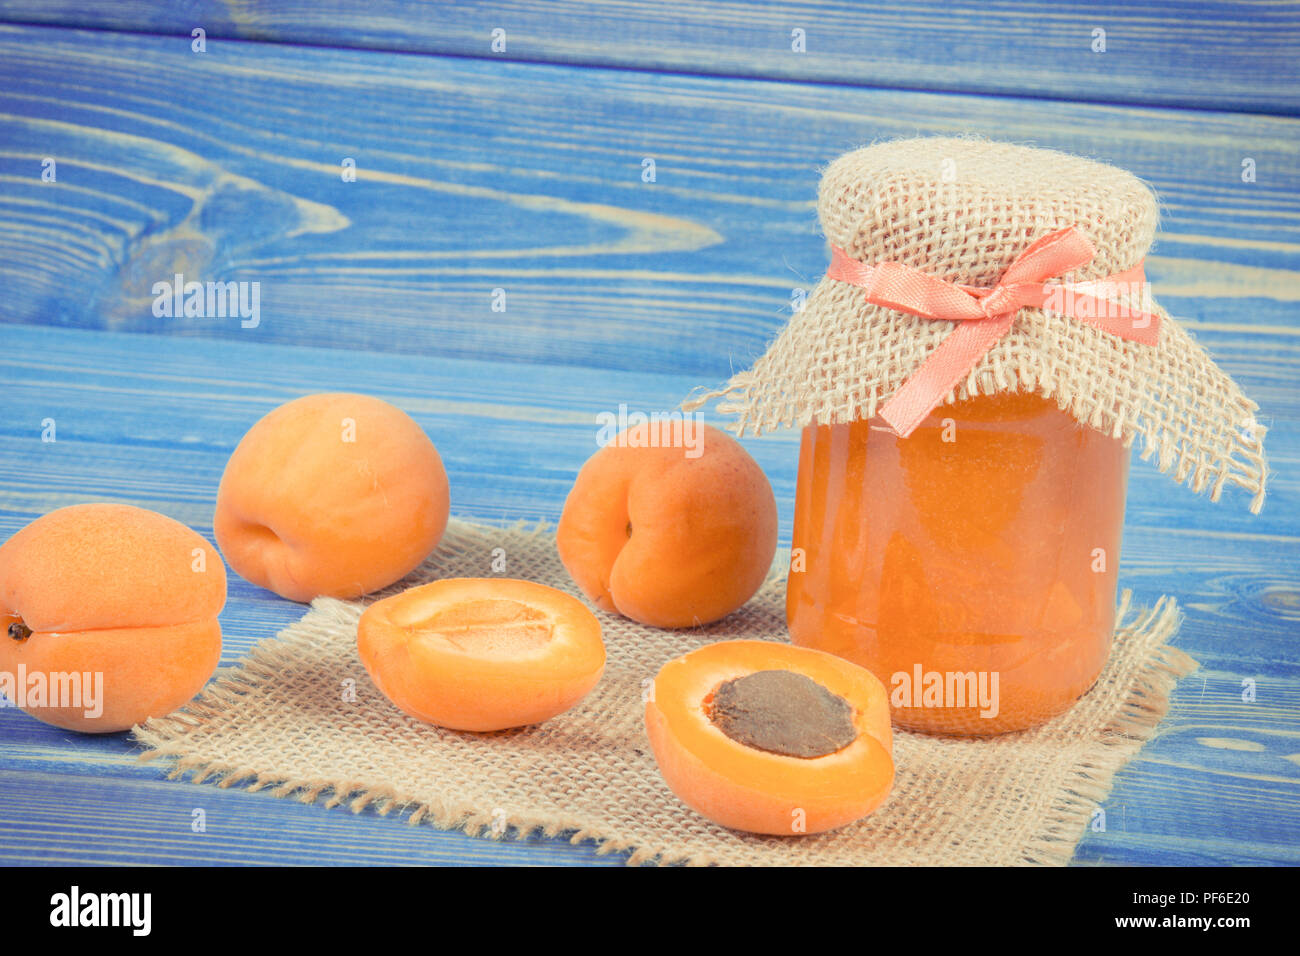 Fresh apricot jam or marmalade in glass jar and ripe fruits on boards, concept of healthy sweet dessert Stock Photo